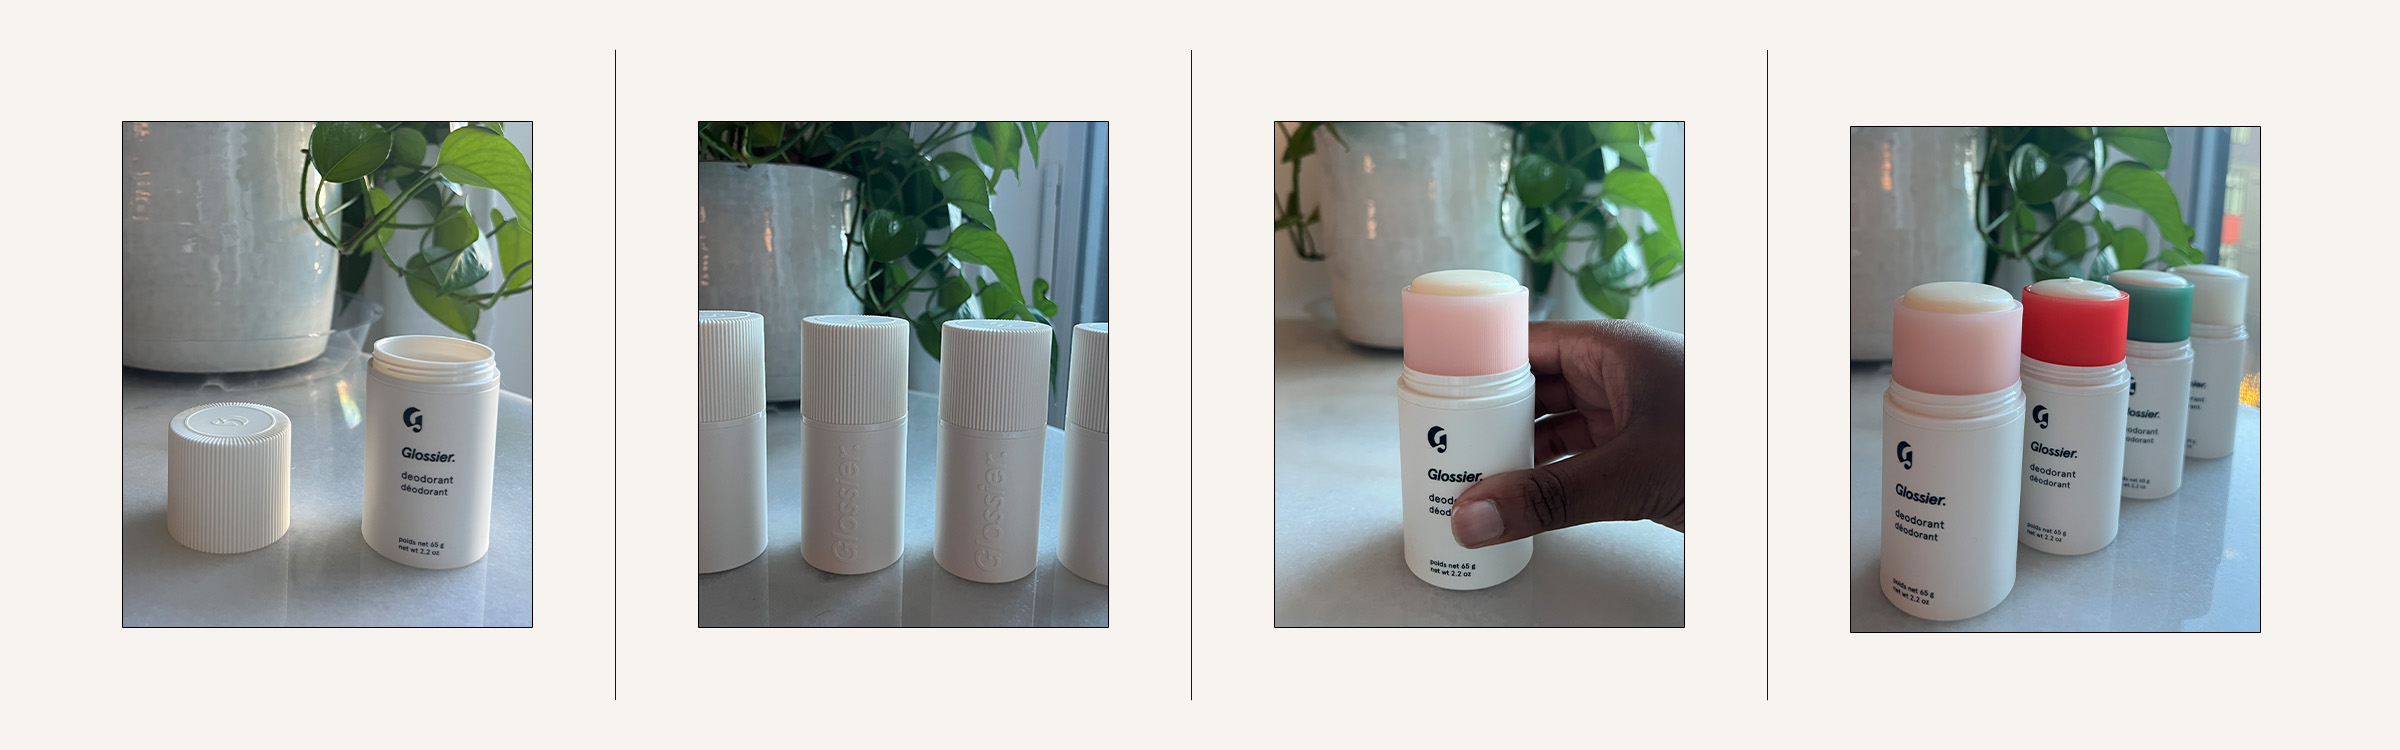 I Tried Glossier's All-Natural Deodorant That Defies Nature